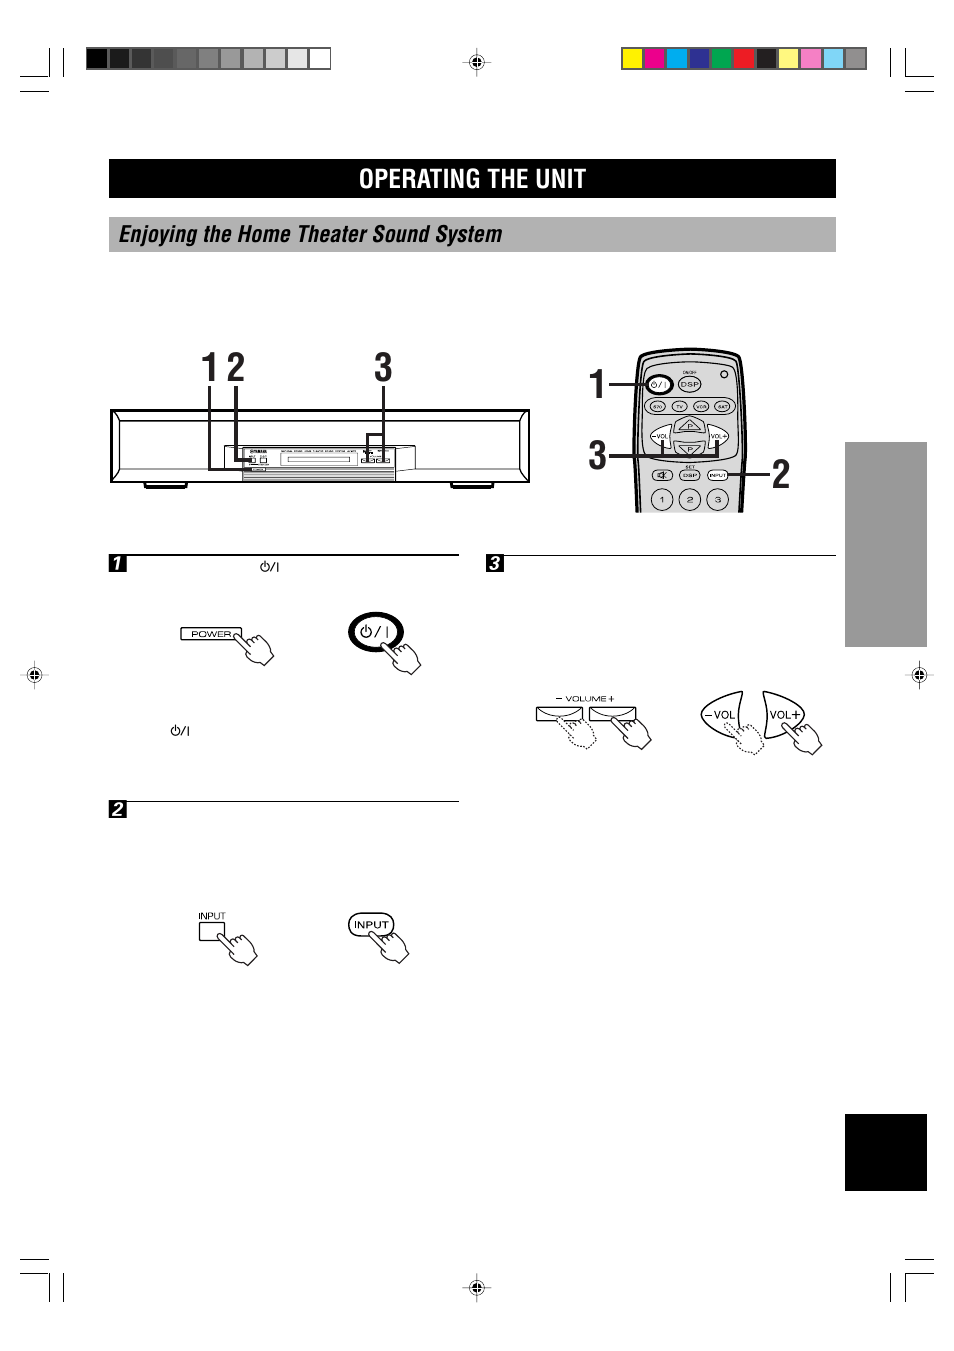 Operating the unit, Enjoying the home theater sound system | Yamaha AV-S70 User Manual | Page 19 / 40